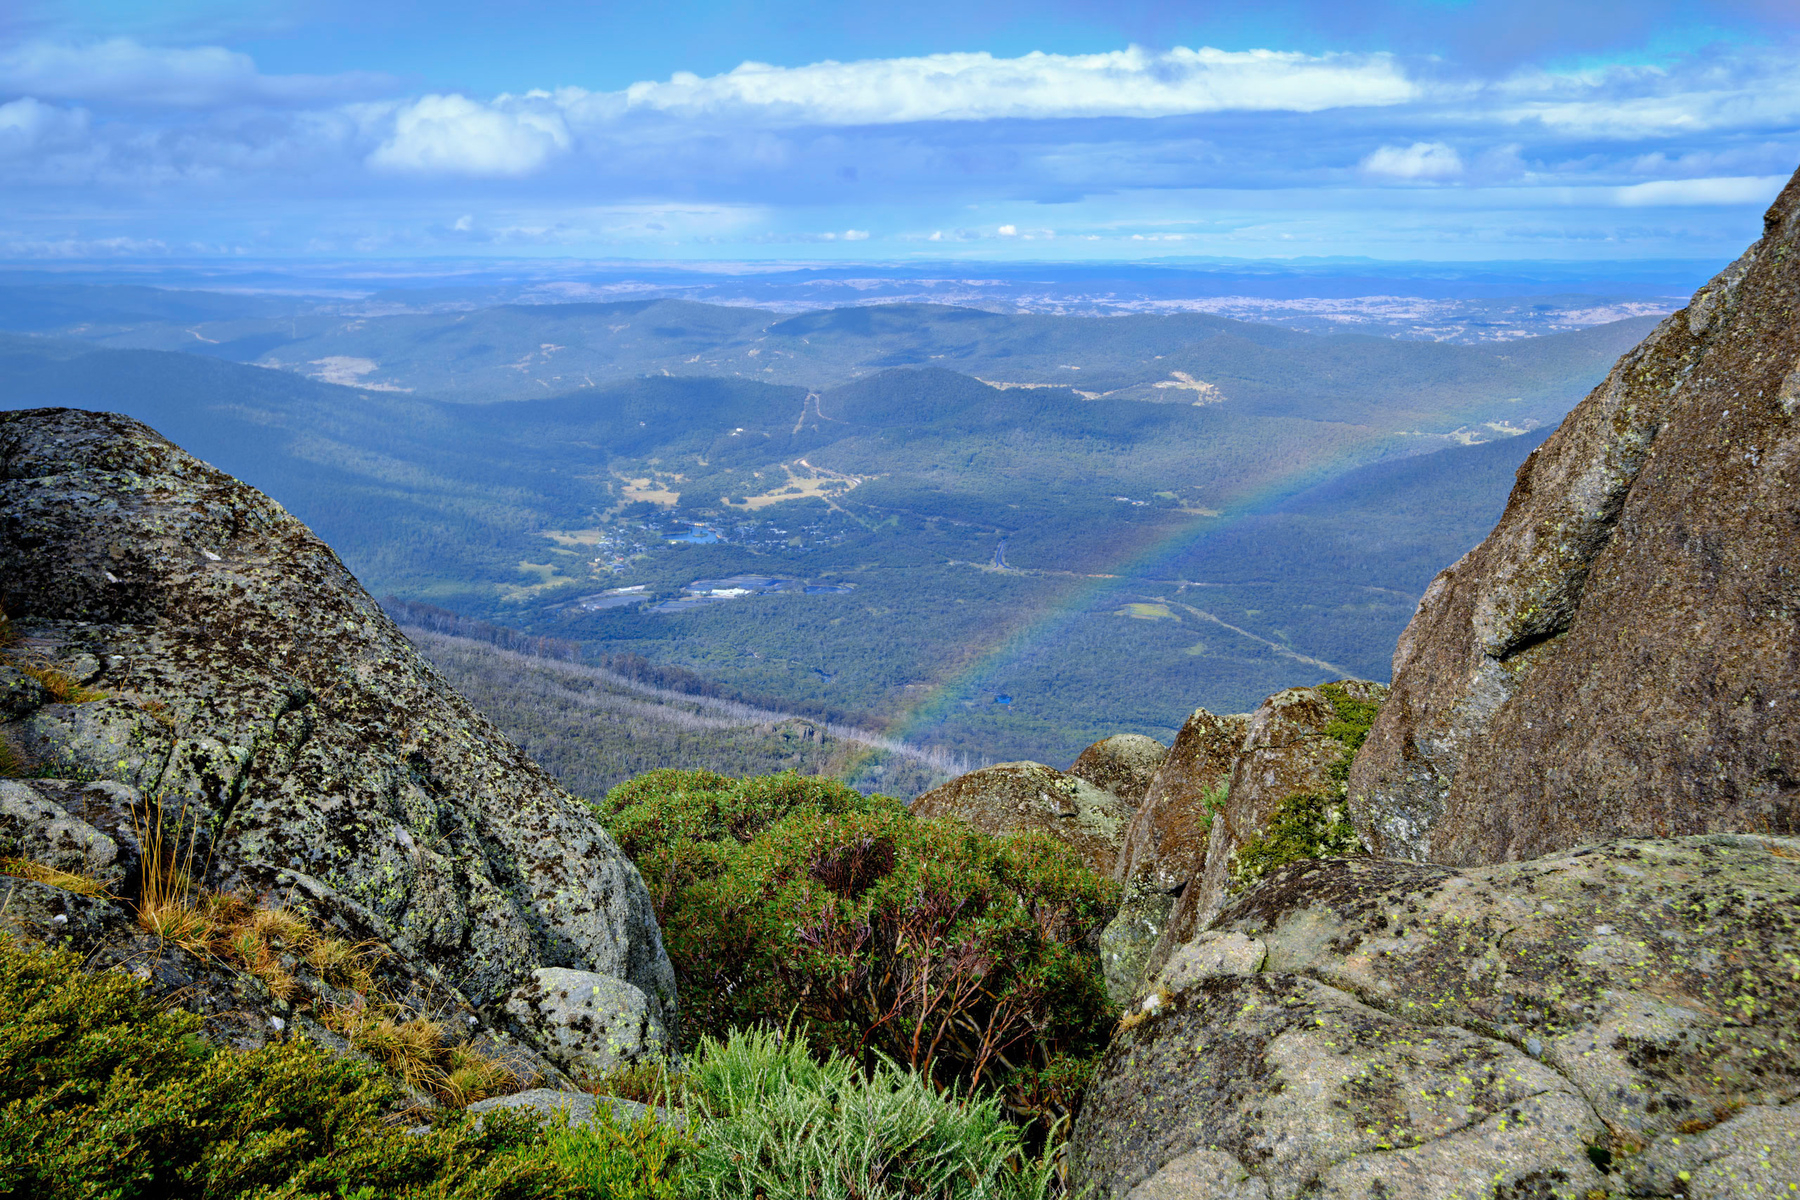 A rainbow over Porcupine Rocks, with a view over the Thredbo River valley below.